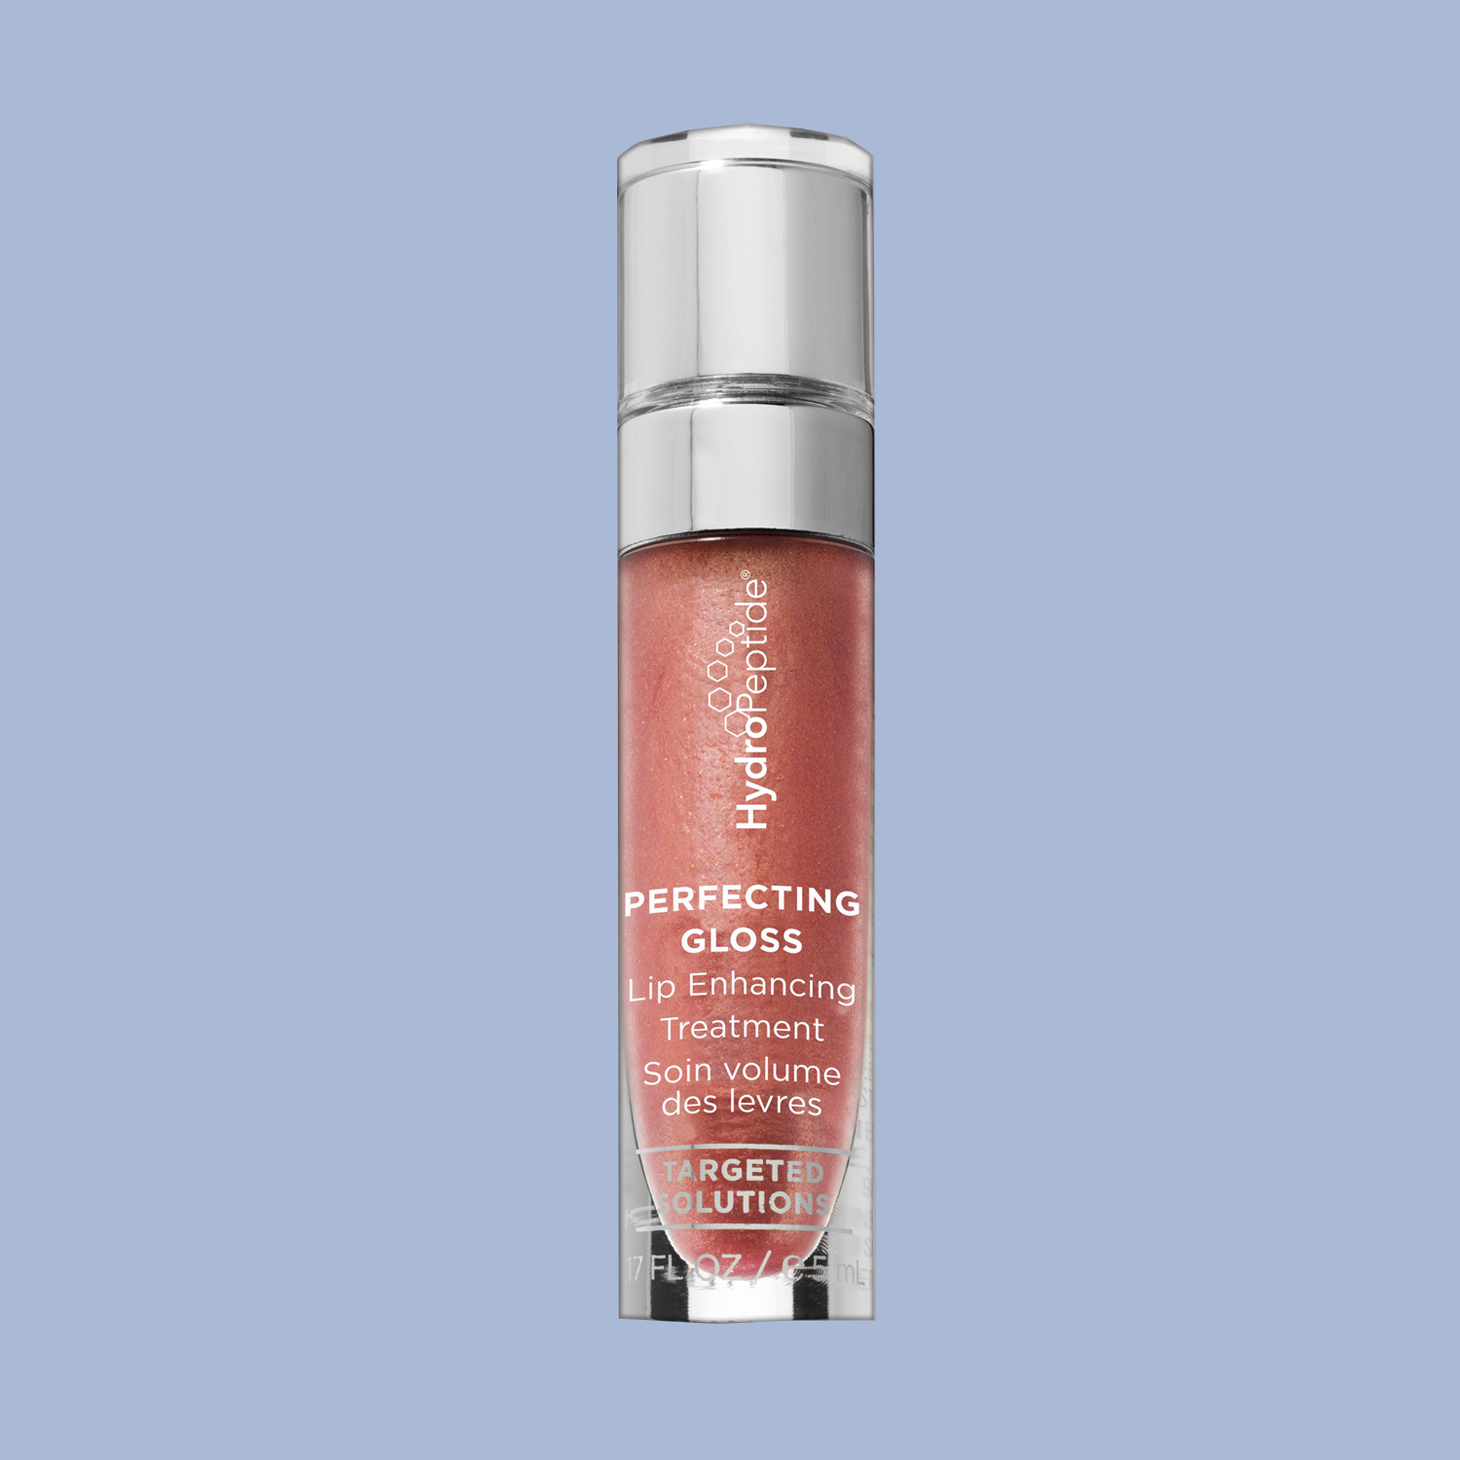 HPRNPPG-PerfectingGloss-NudePearl1of2730x730_2xpx.png